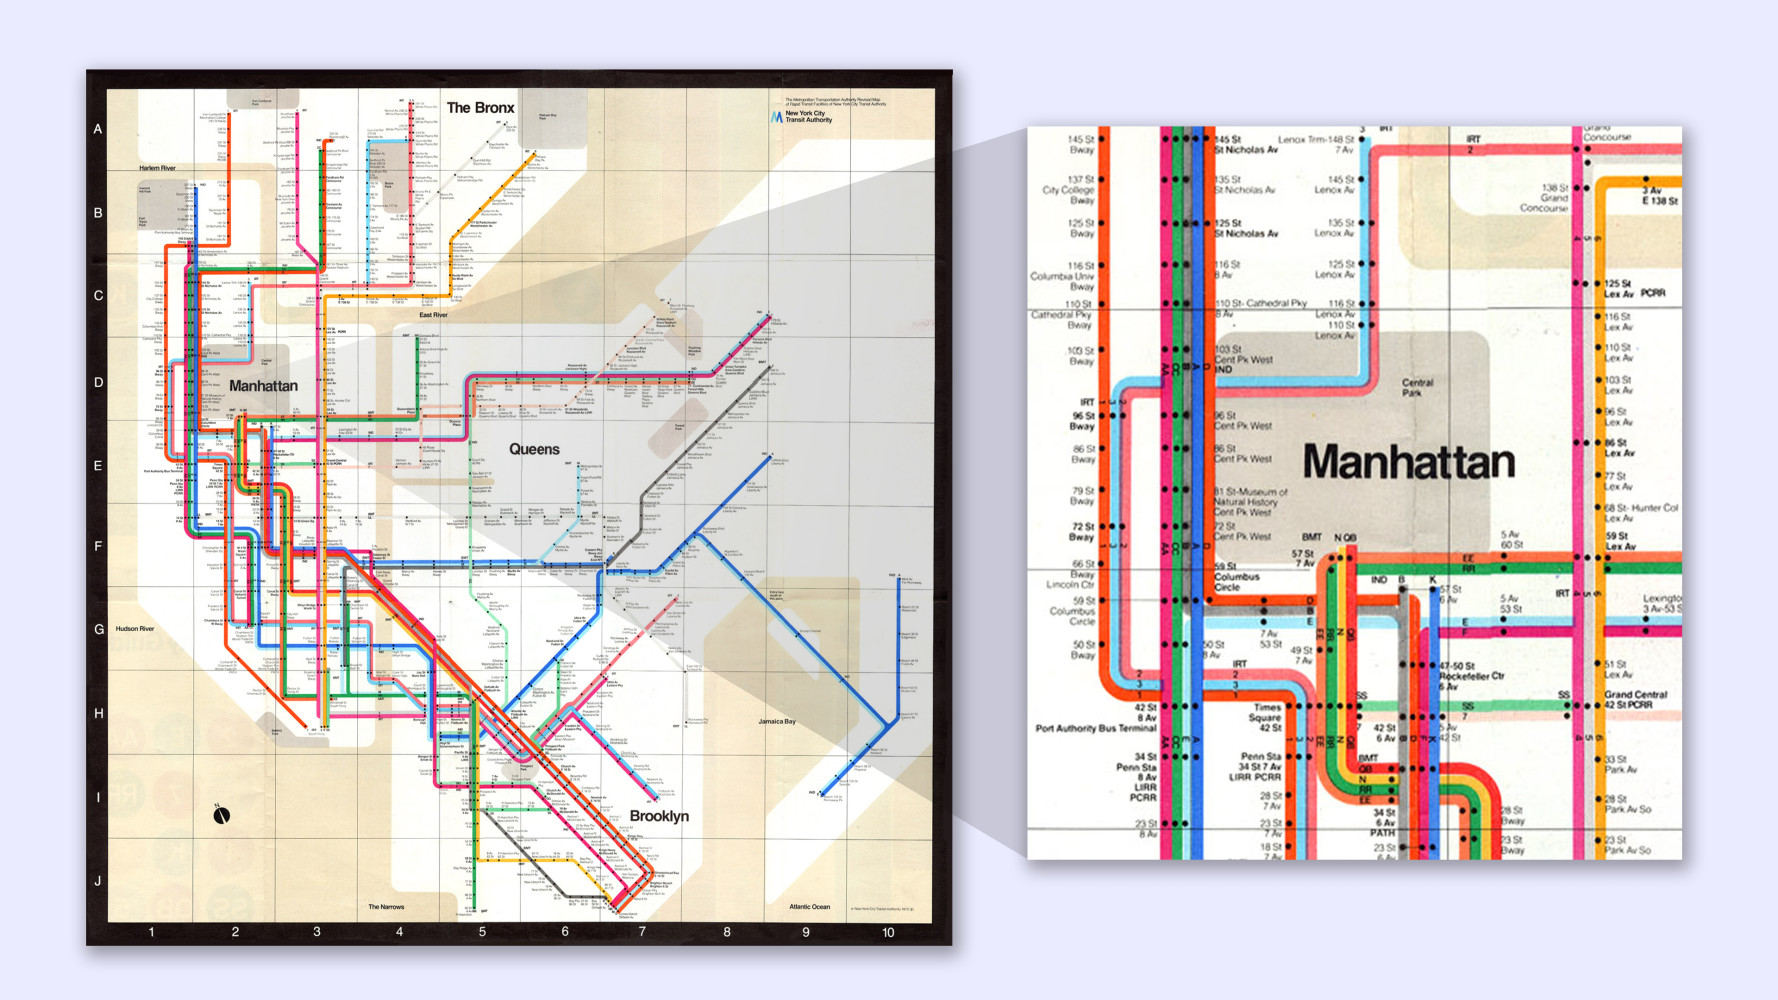 An image of the 1972 New York Subway Map by Massimo Vignelli with a detail view to the right side. Credit: Metropolitan Transportation Authority.